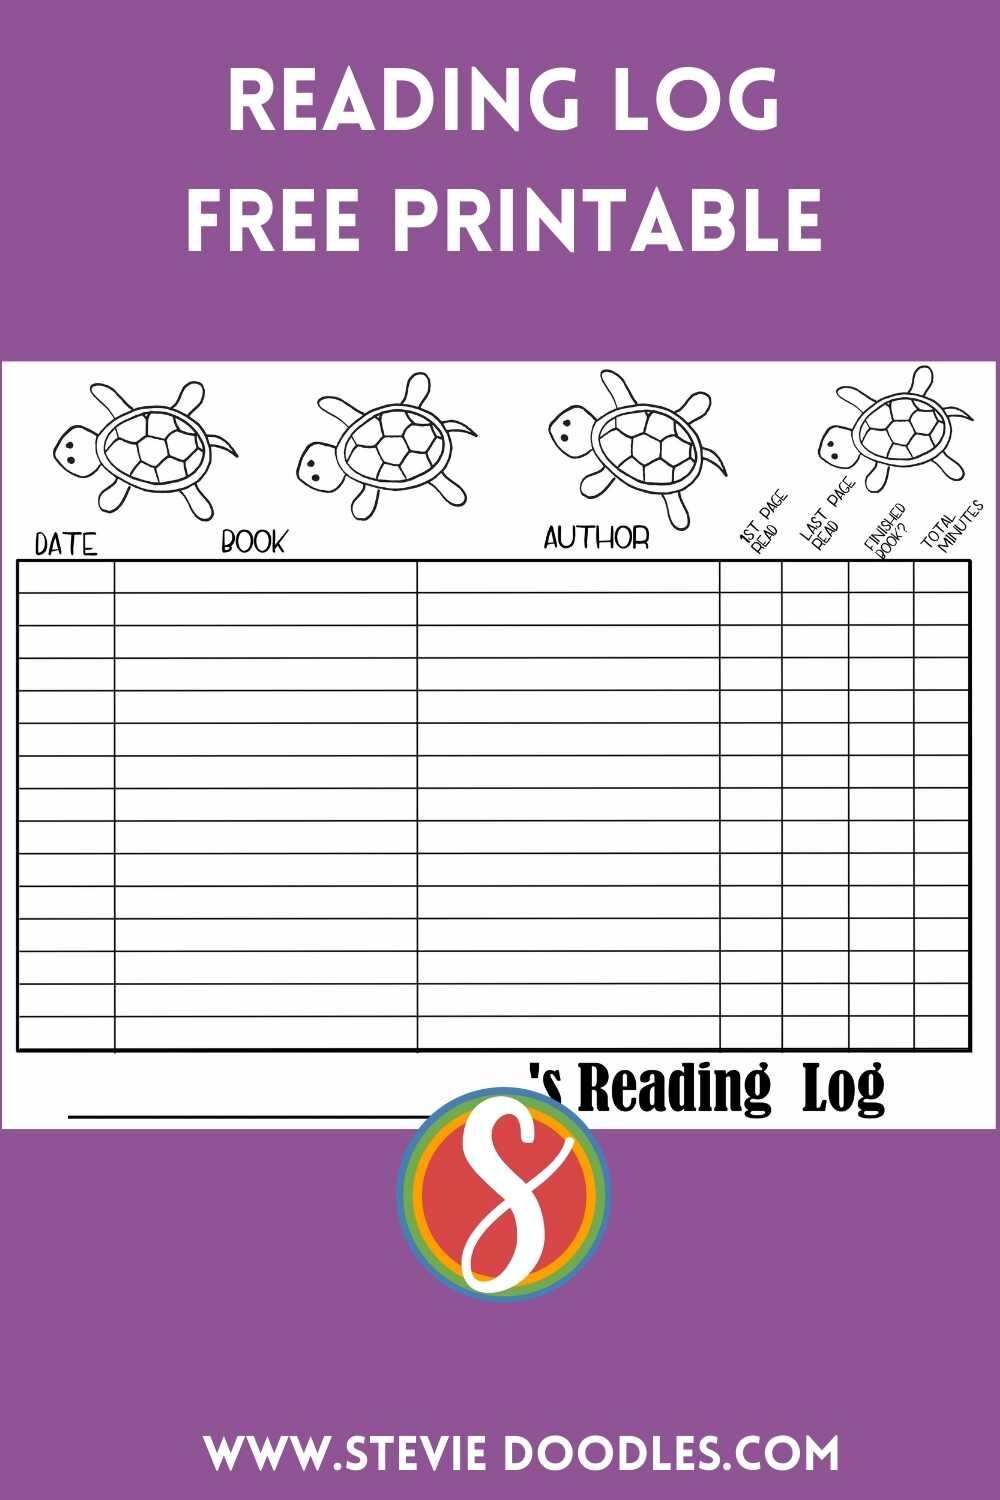 Free printable reading log from Stevie Doodles with TURTLES -  track your reading for your reading program! 11 different styles to choose from!